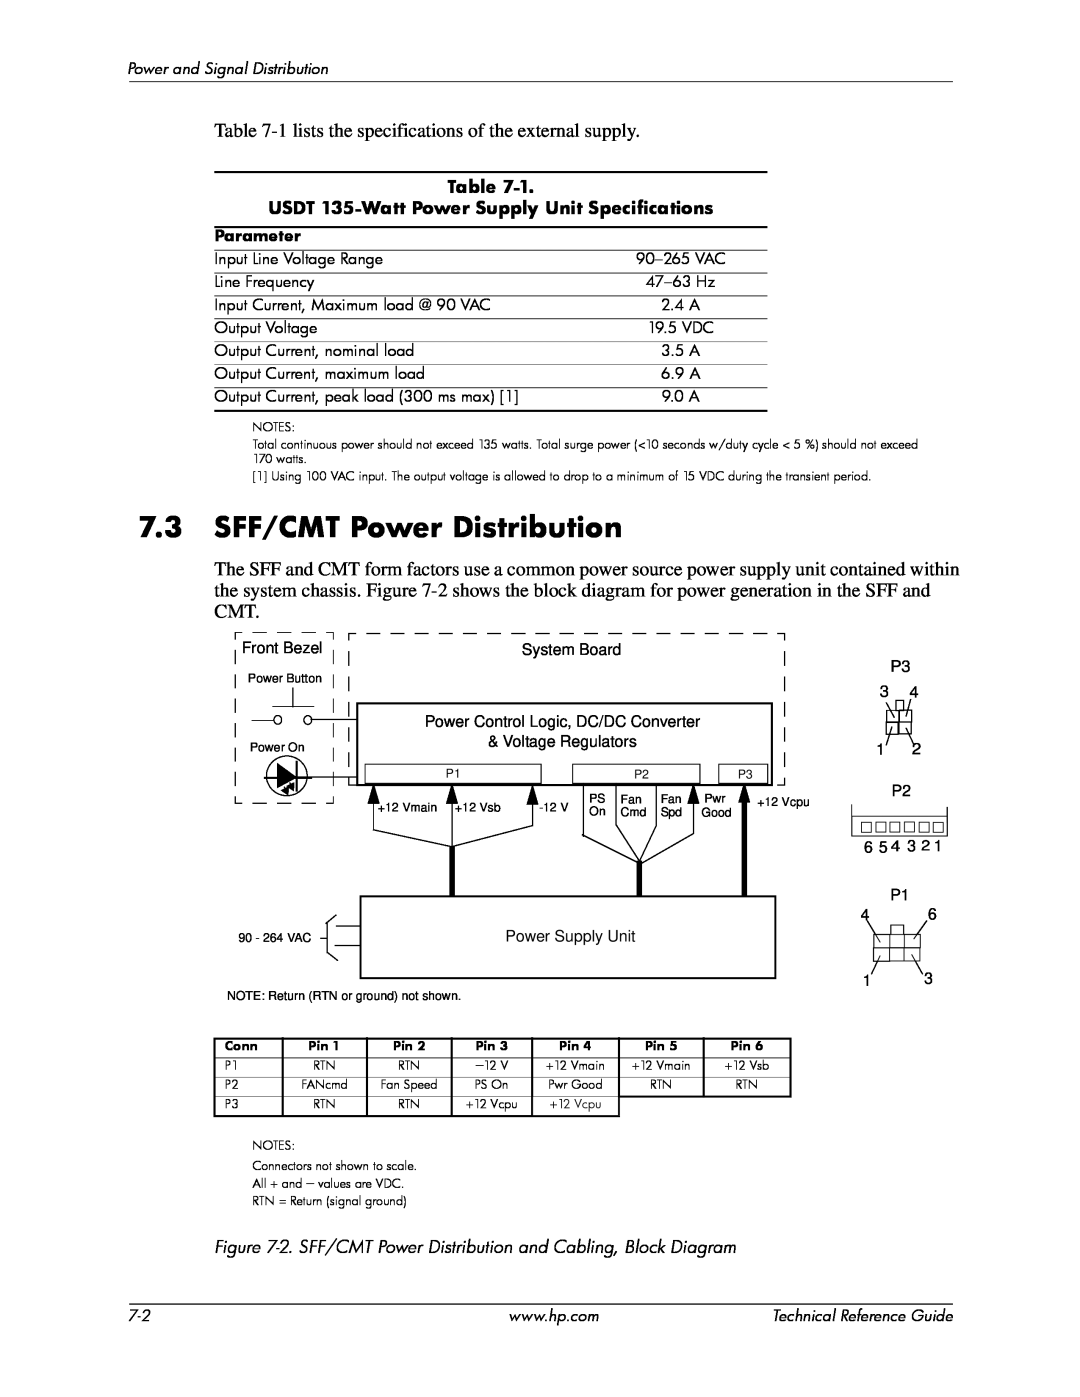 HP 8000 tower manual 7.3 SFF/CMT Power Distribution, 1 lists the specifications of the external supply 